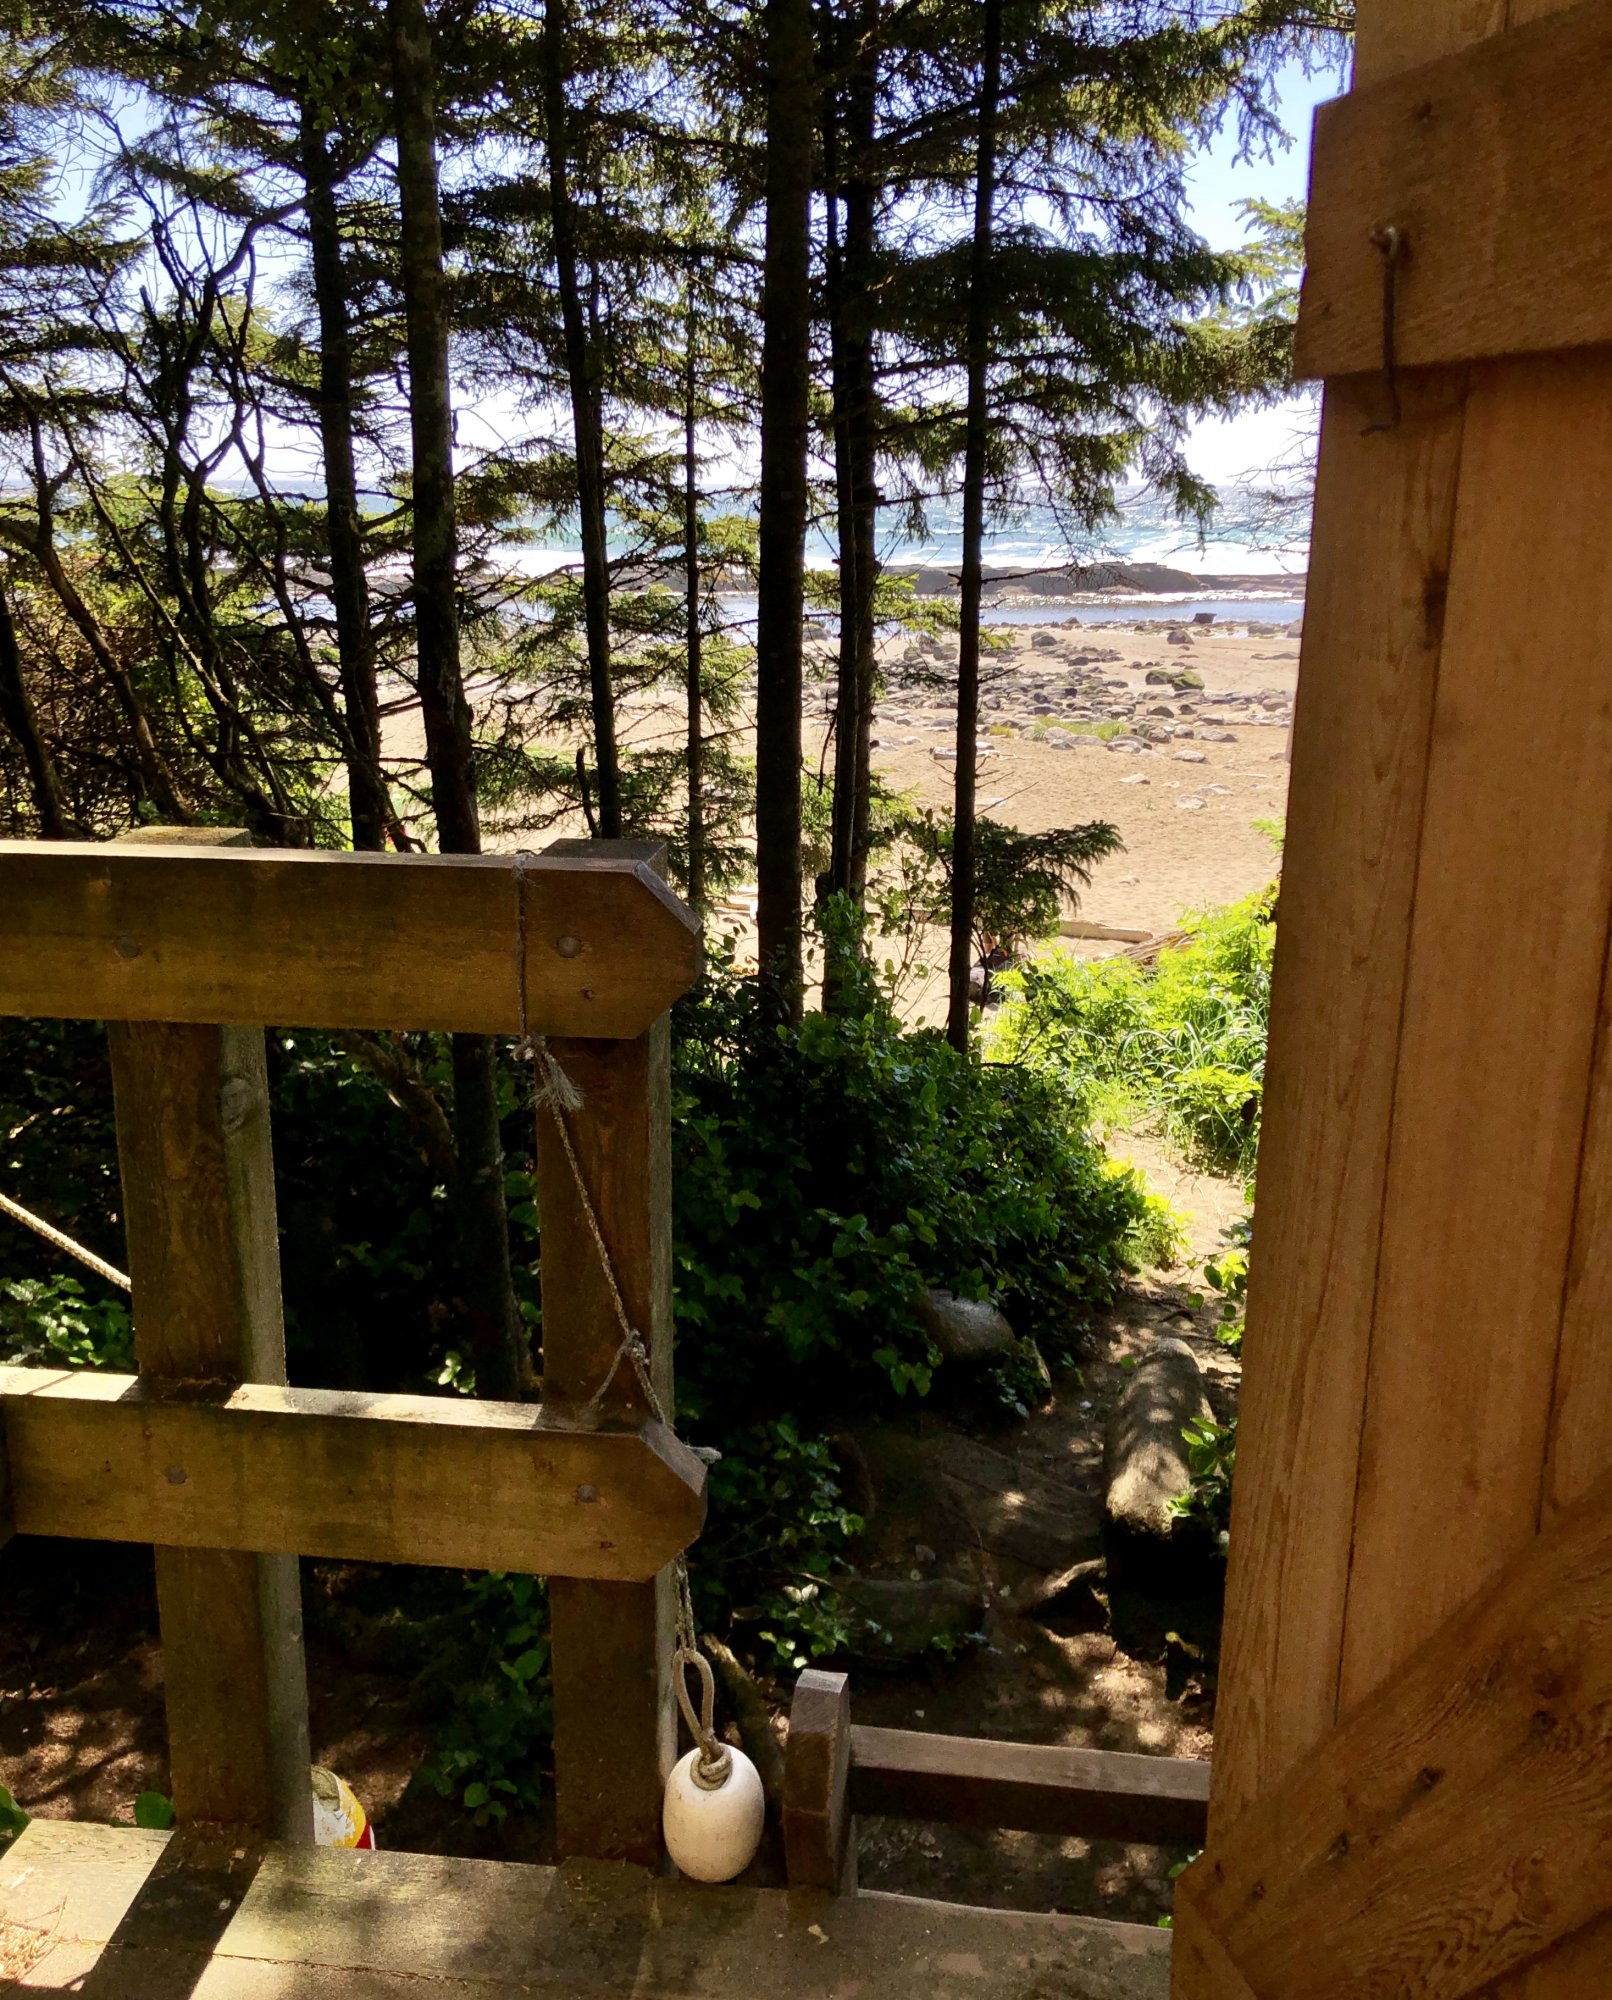 The view you could enjoy while you poo at Cribs Creek on the West Coast Trail